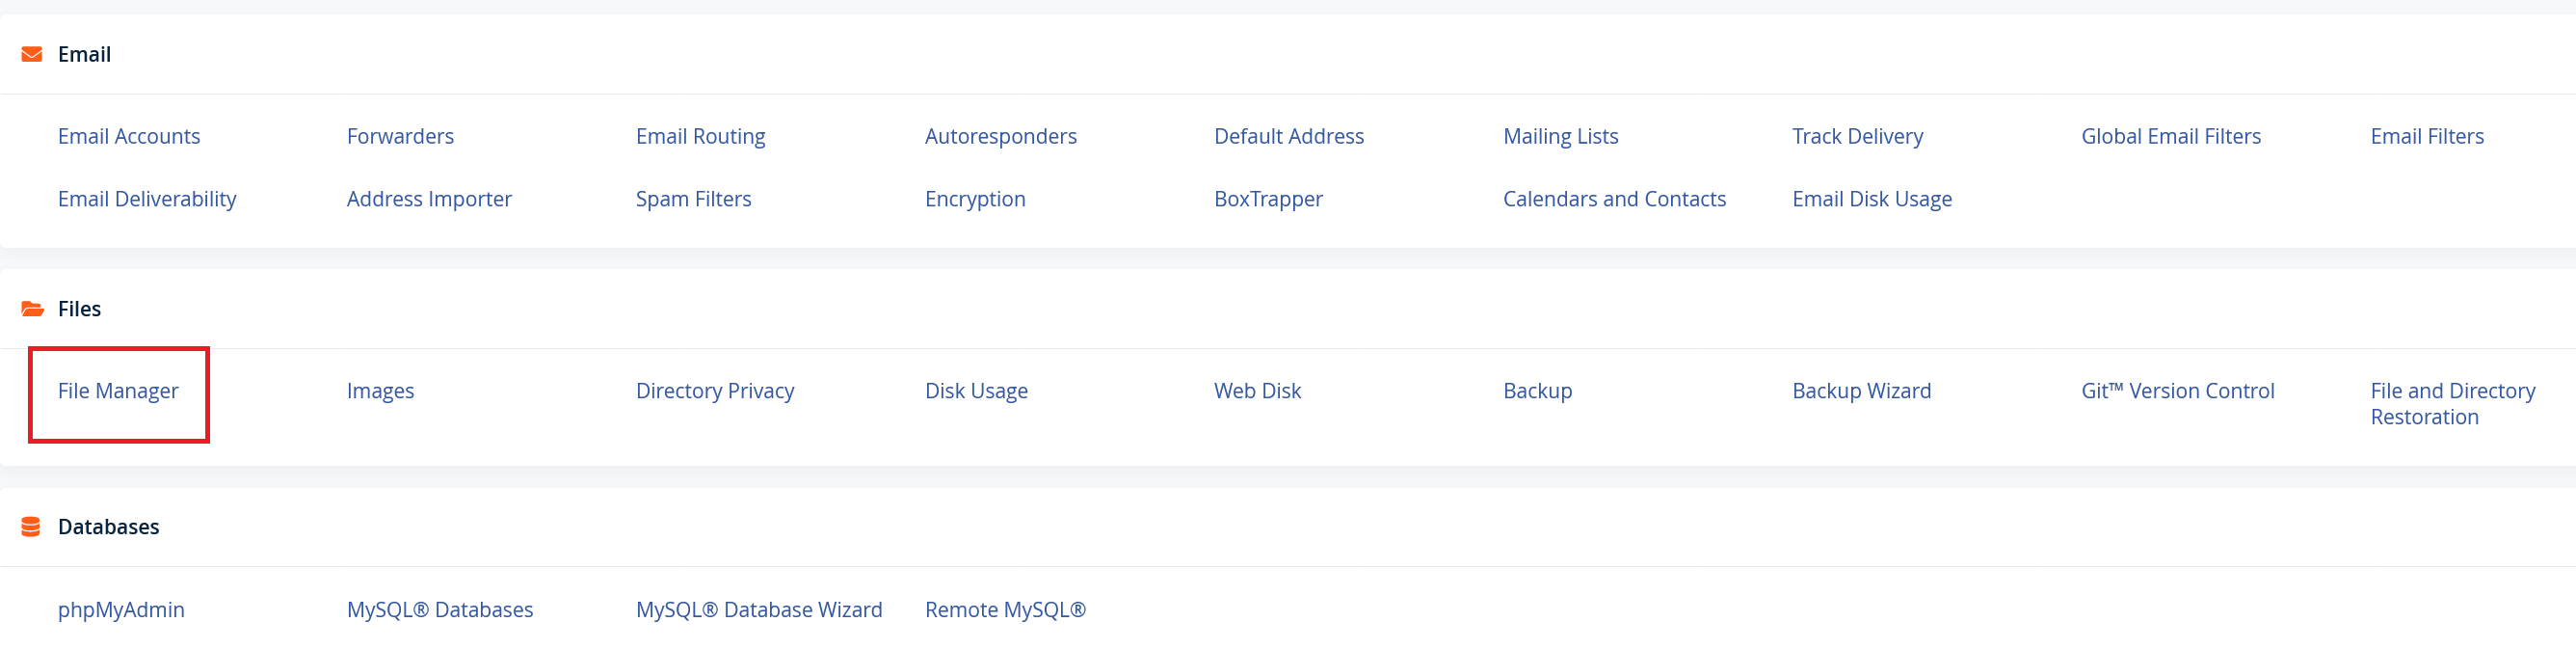 cpanel file manager